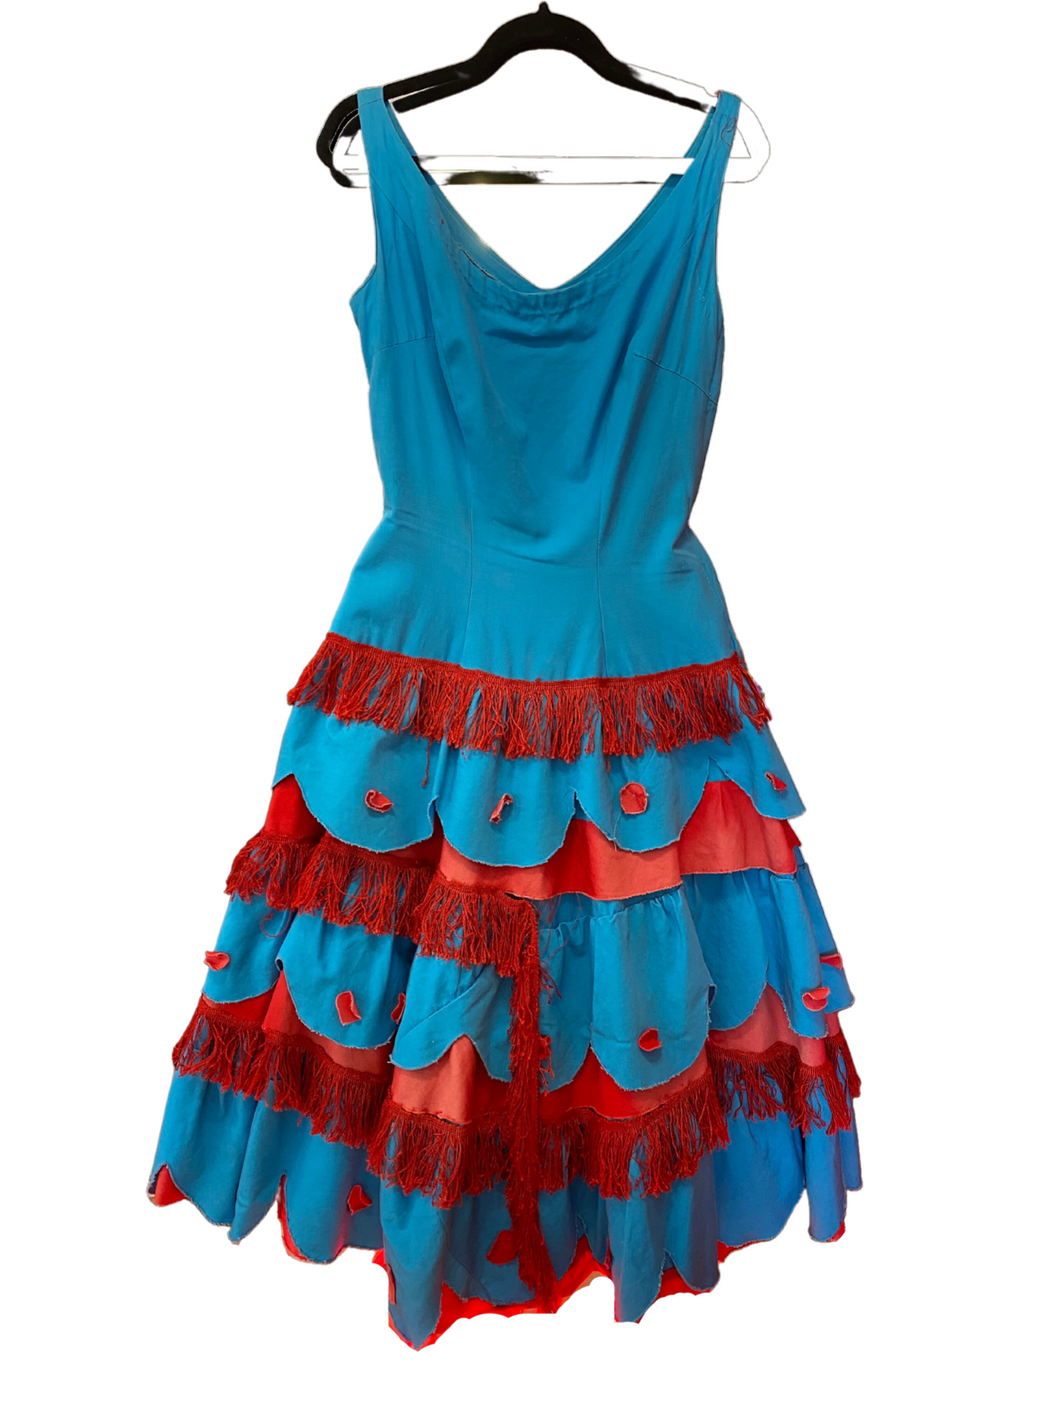 Funky Blue and Red Dress